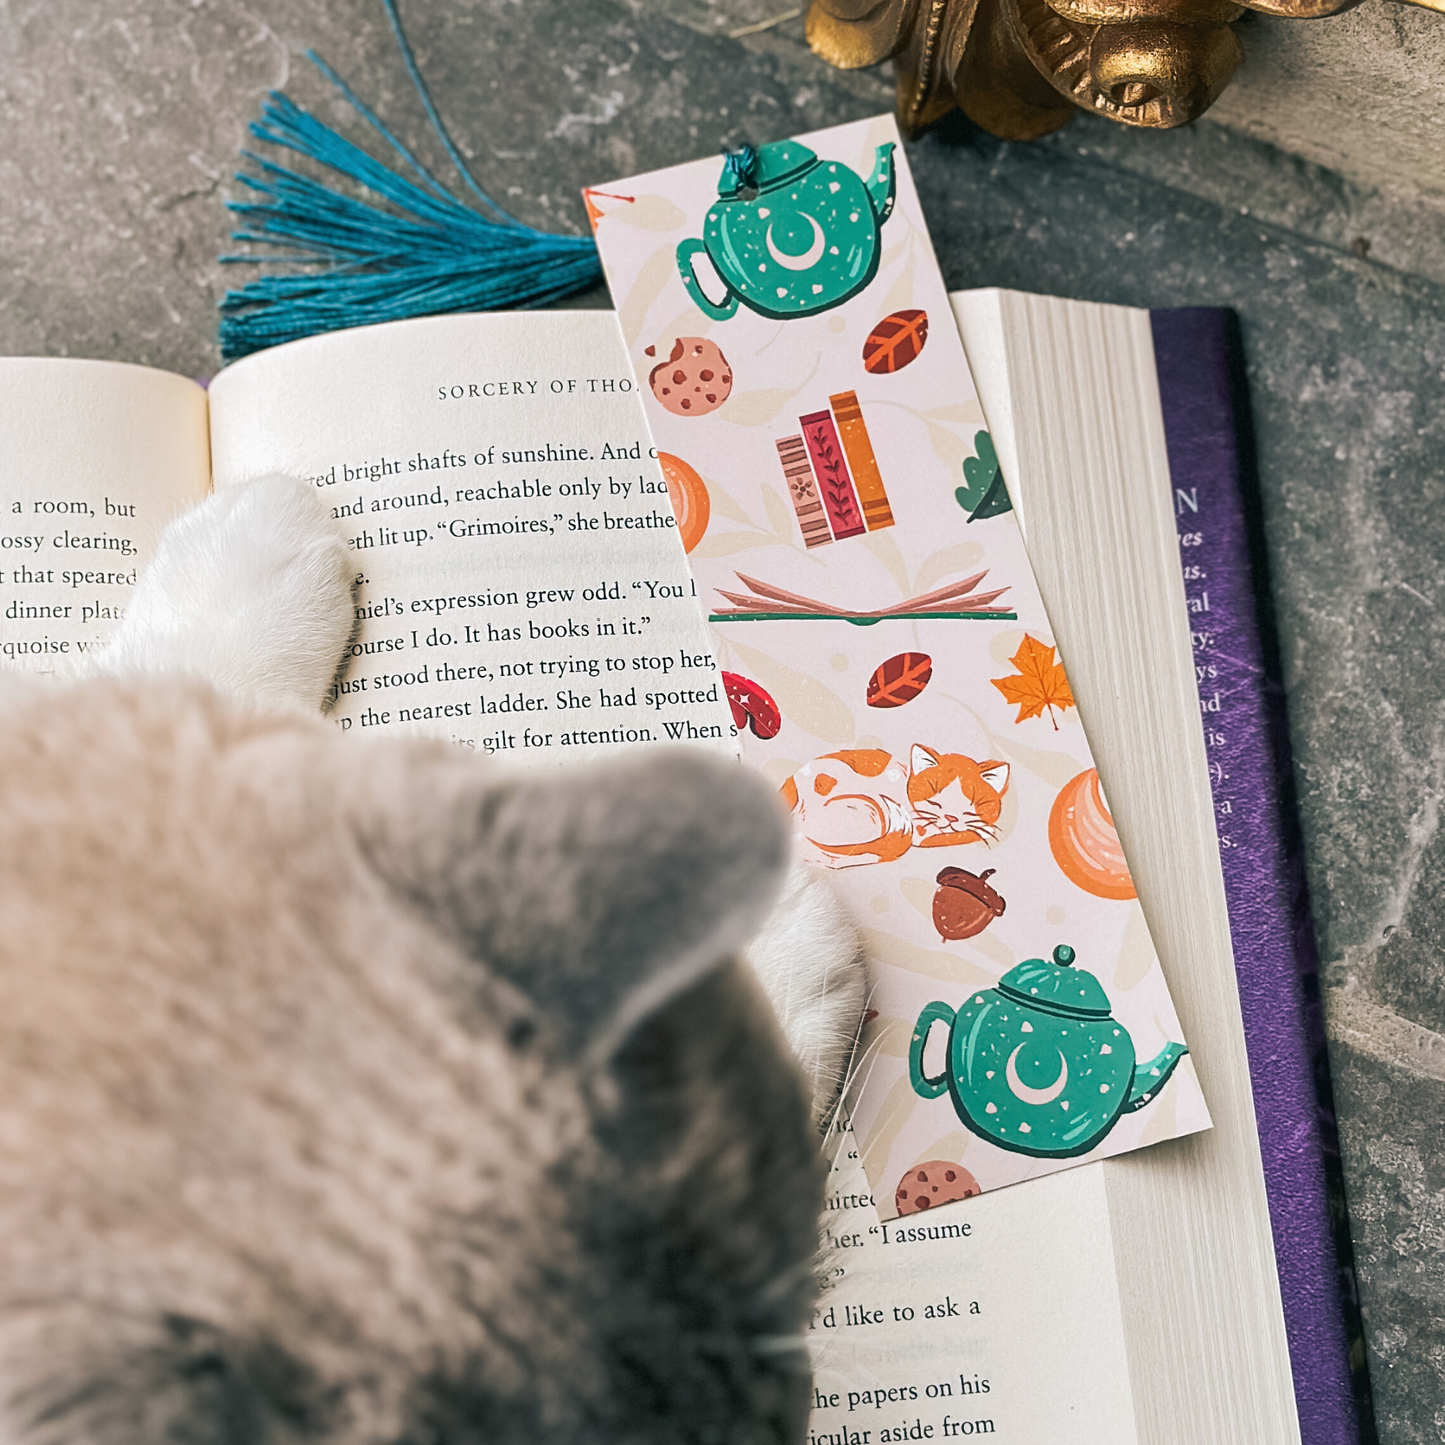 Cozy Reads card bookmark